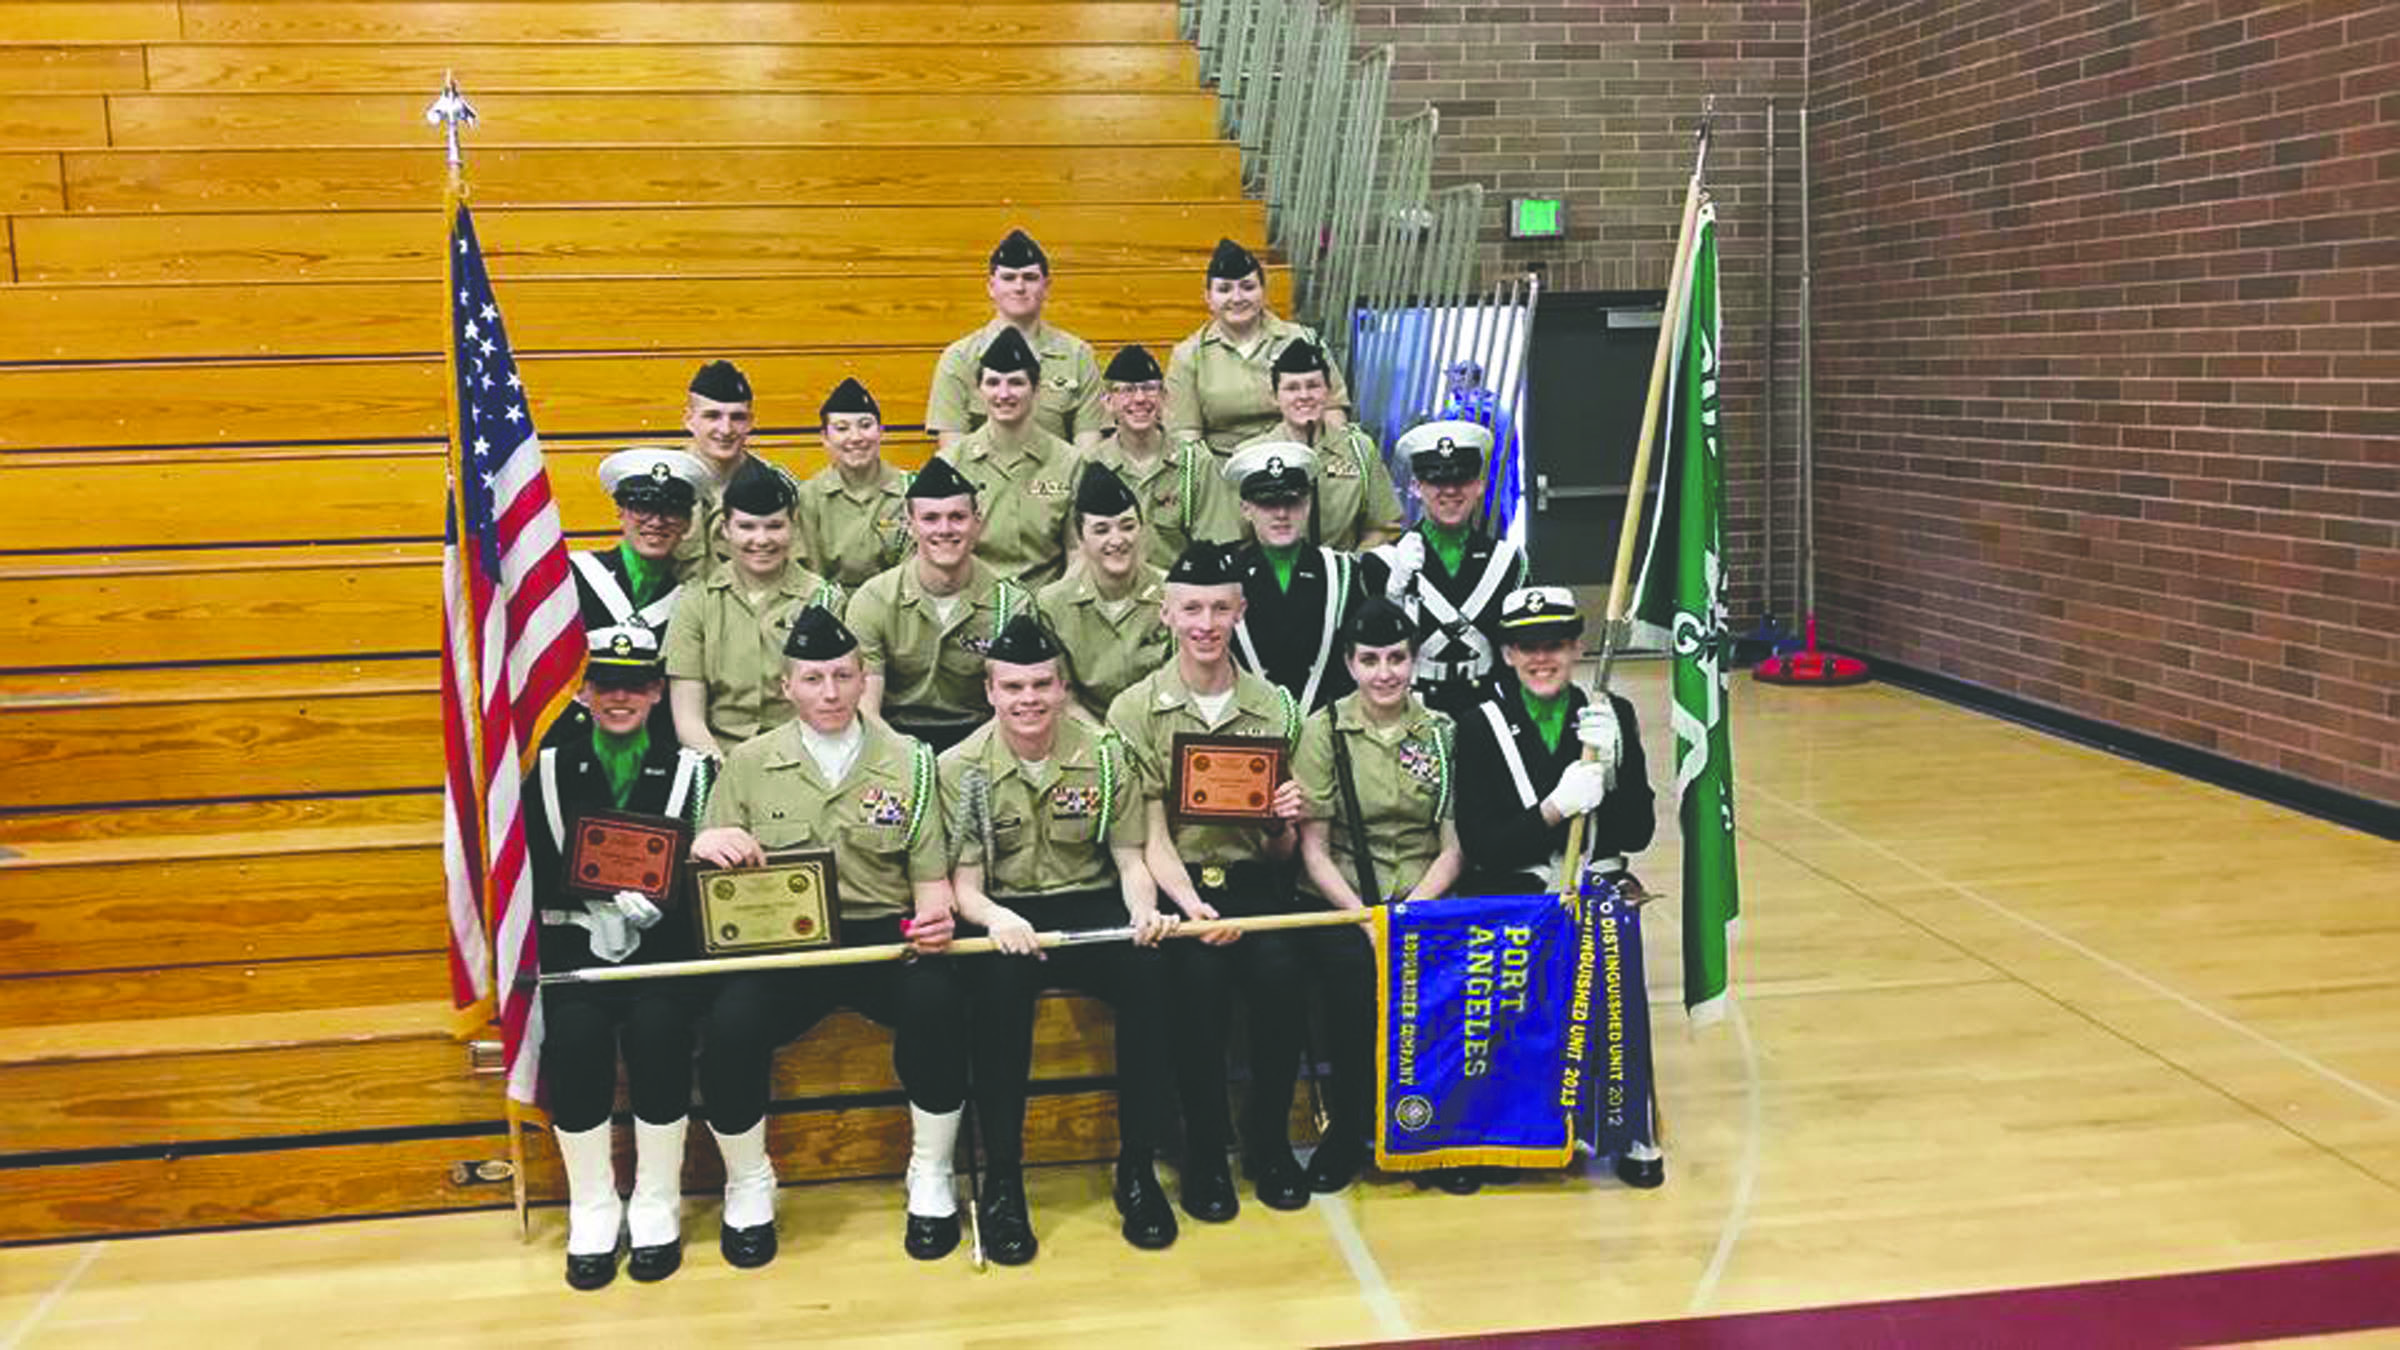 Port Angeles High School NJROTC members display the regional championship plaque they earned in armed drill